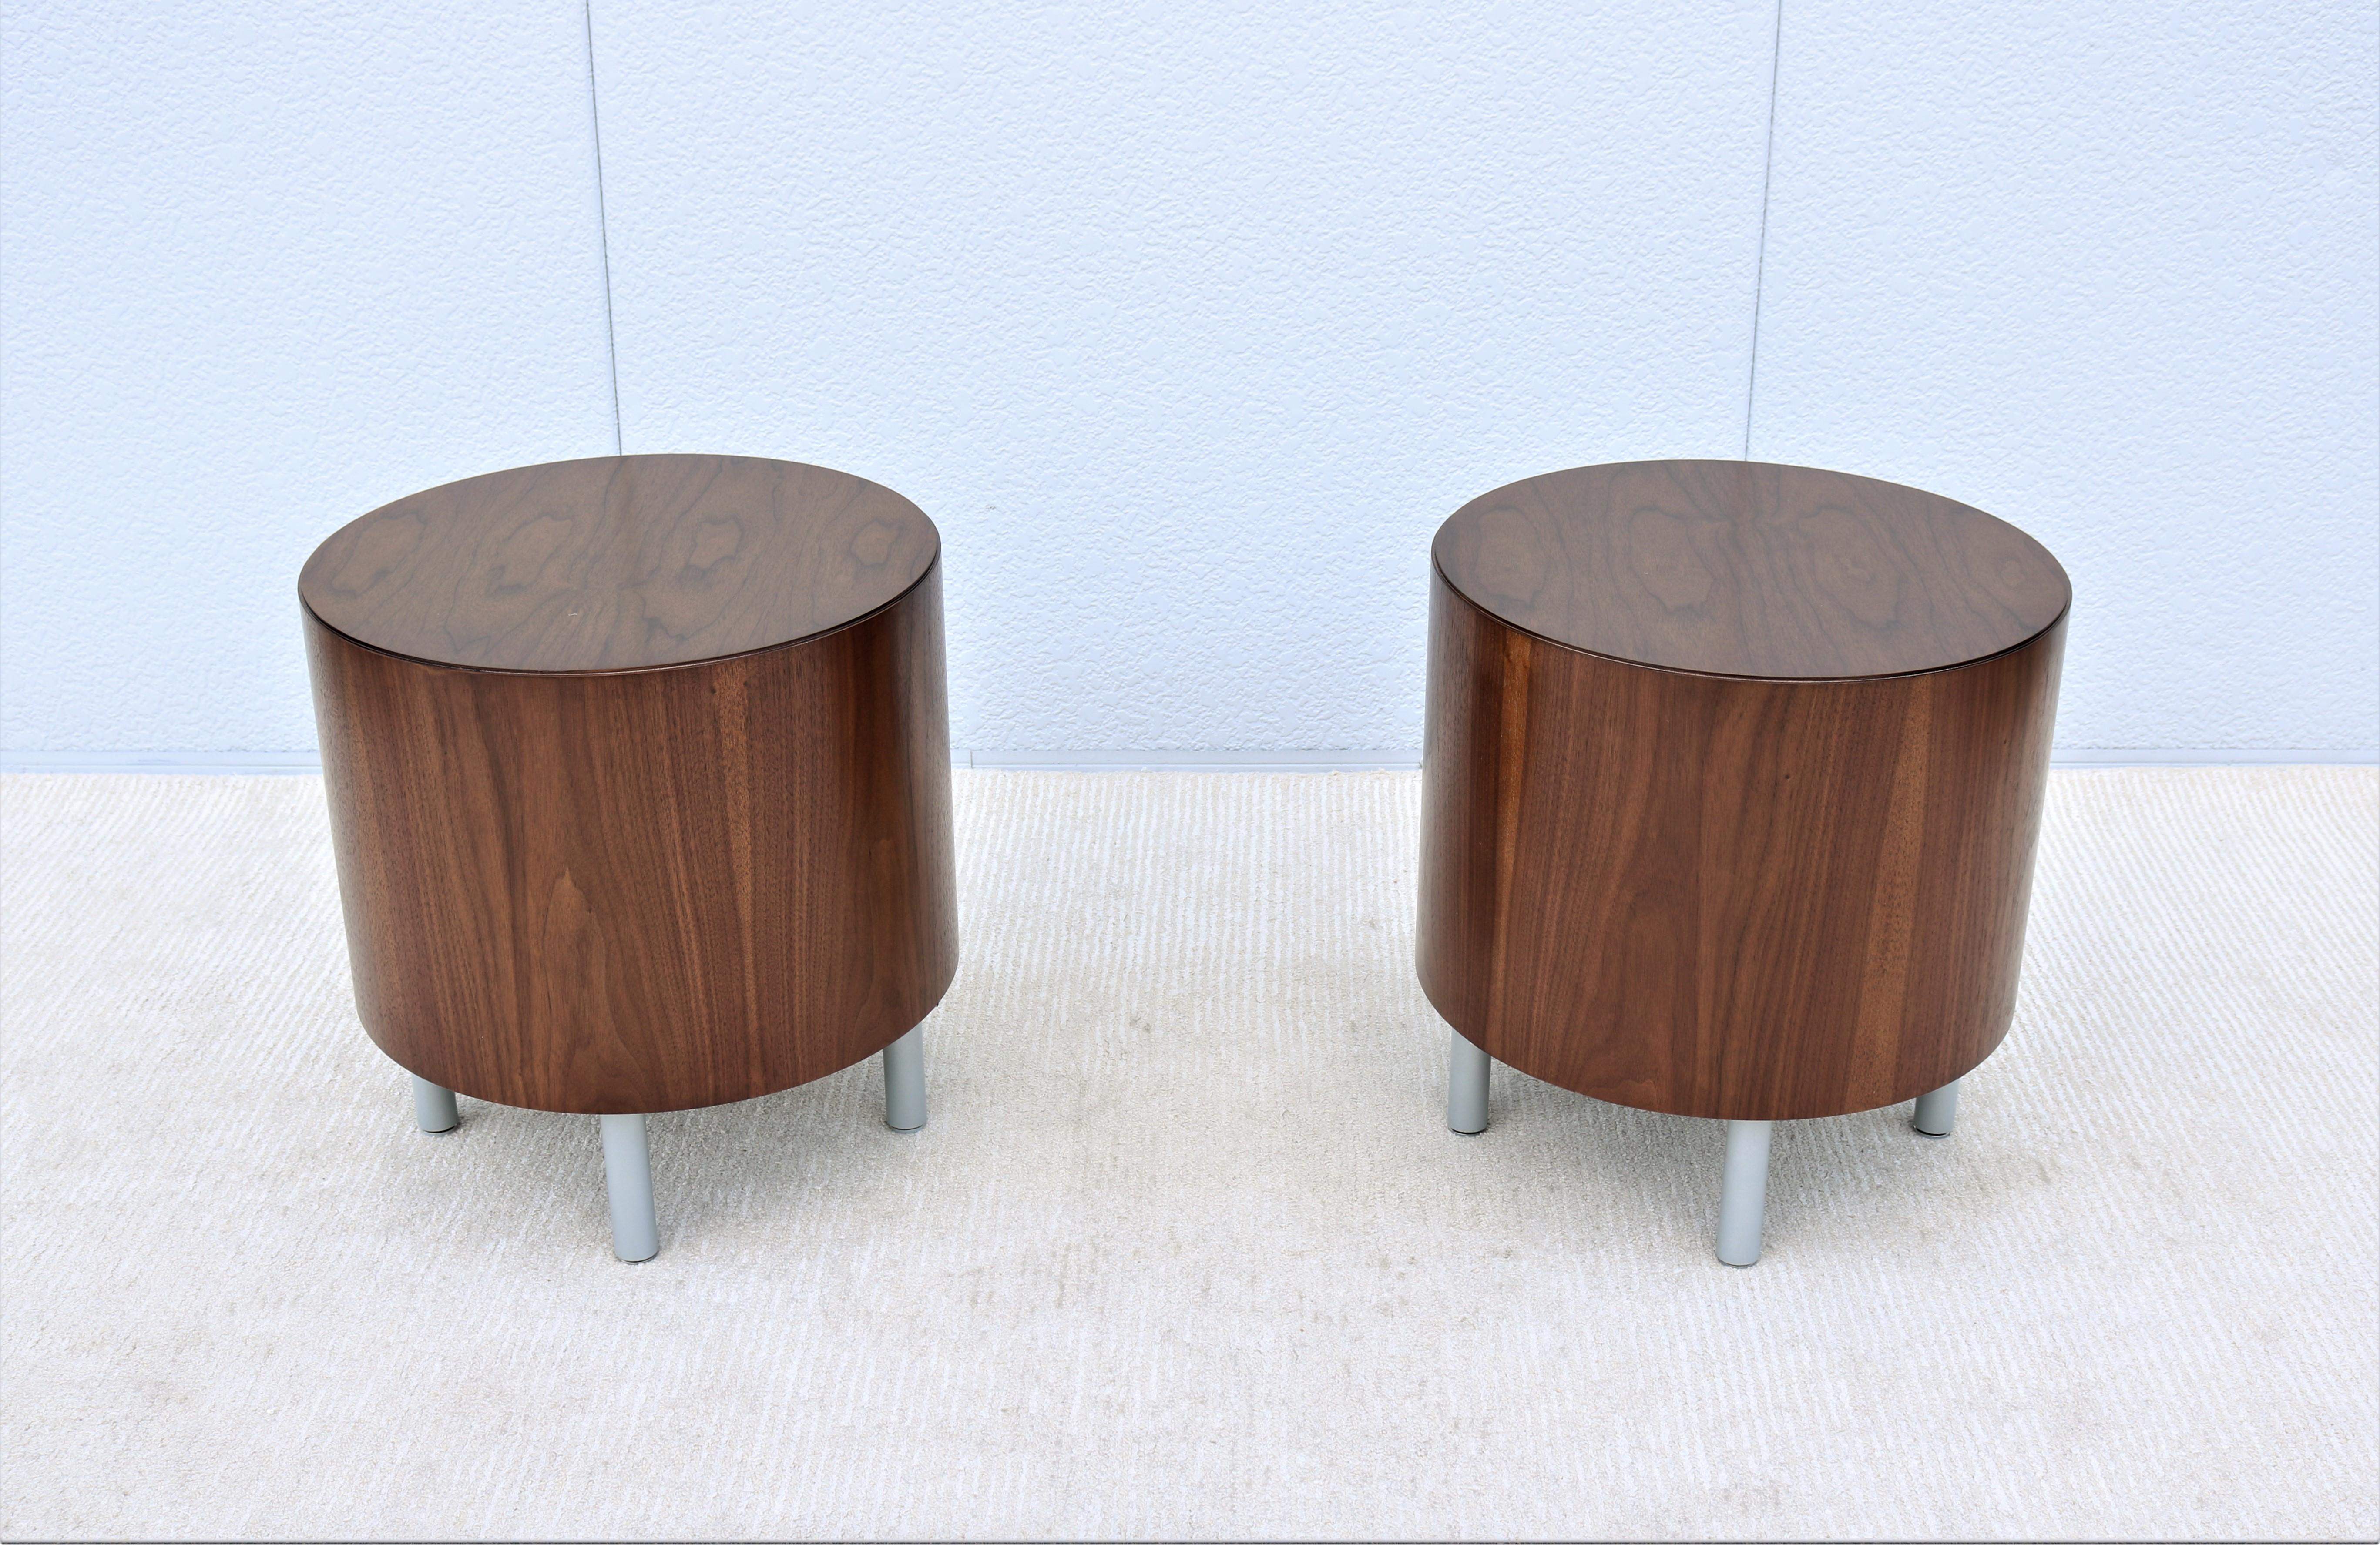 Stunning pair of walnut cylinder drum side or end tables by Kimball. 
Drum tables address a number of functional requirements and fit seamlessly into any environment.
These gorgeous tables combine the elegance you desire with the functionality you